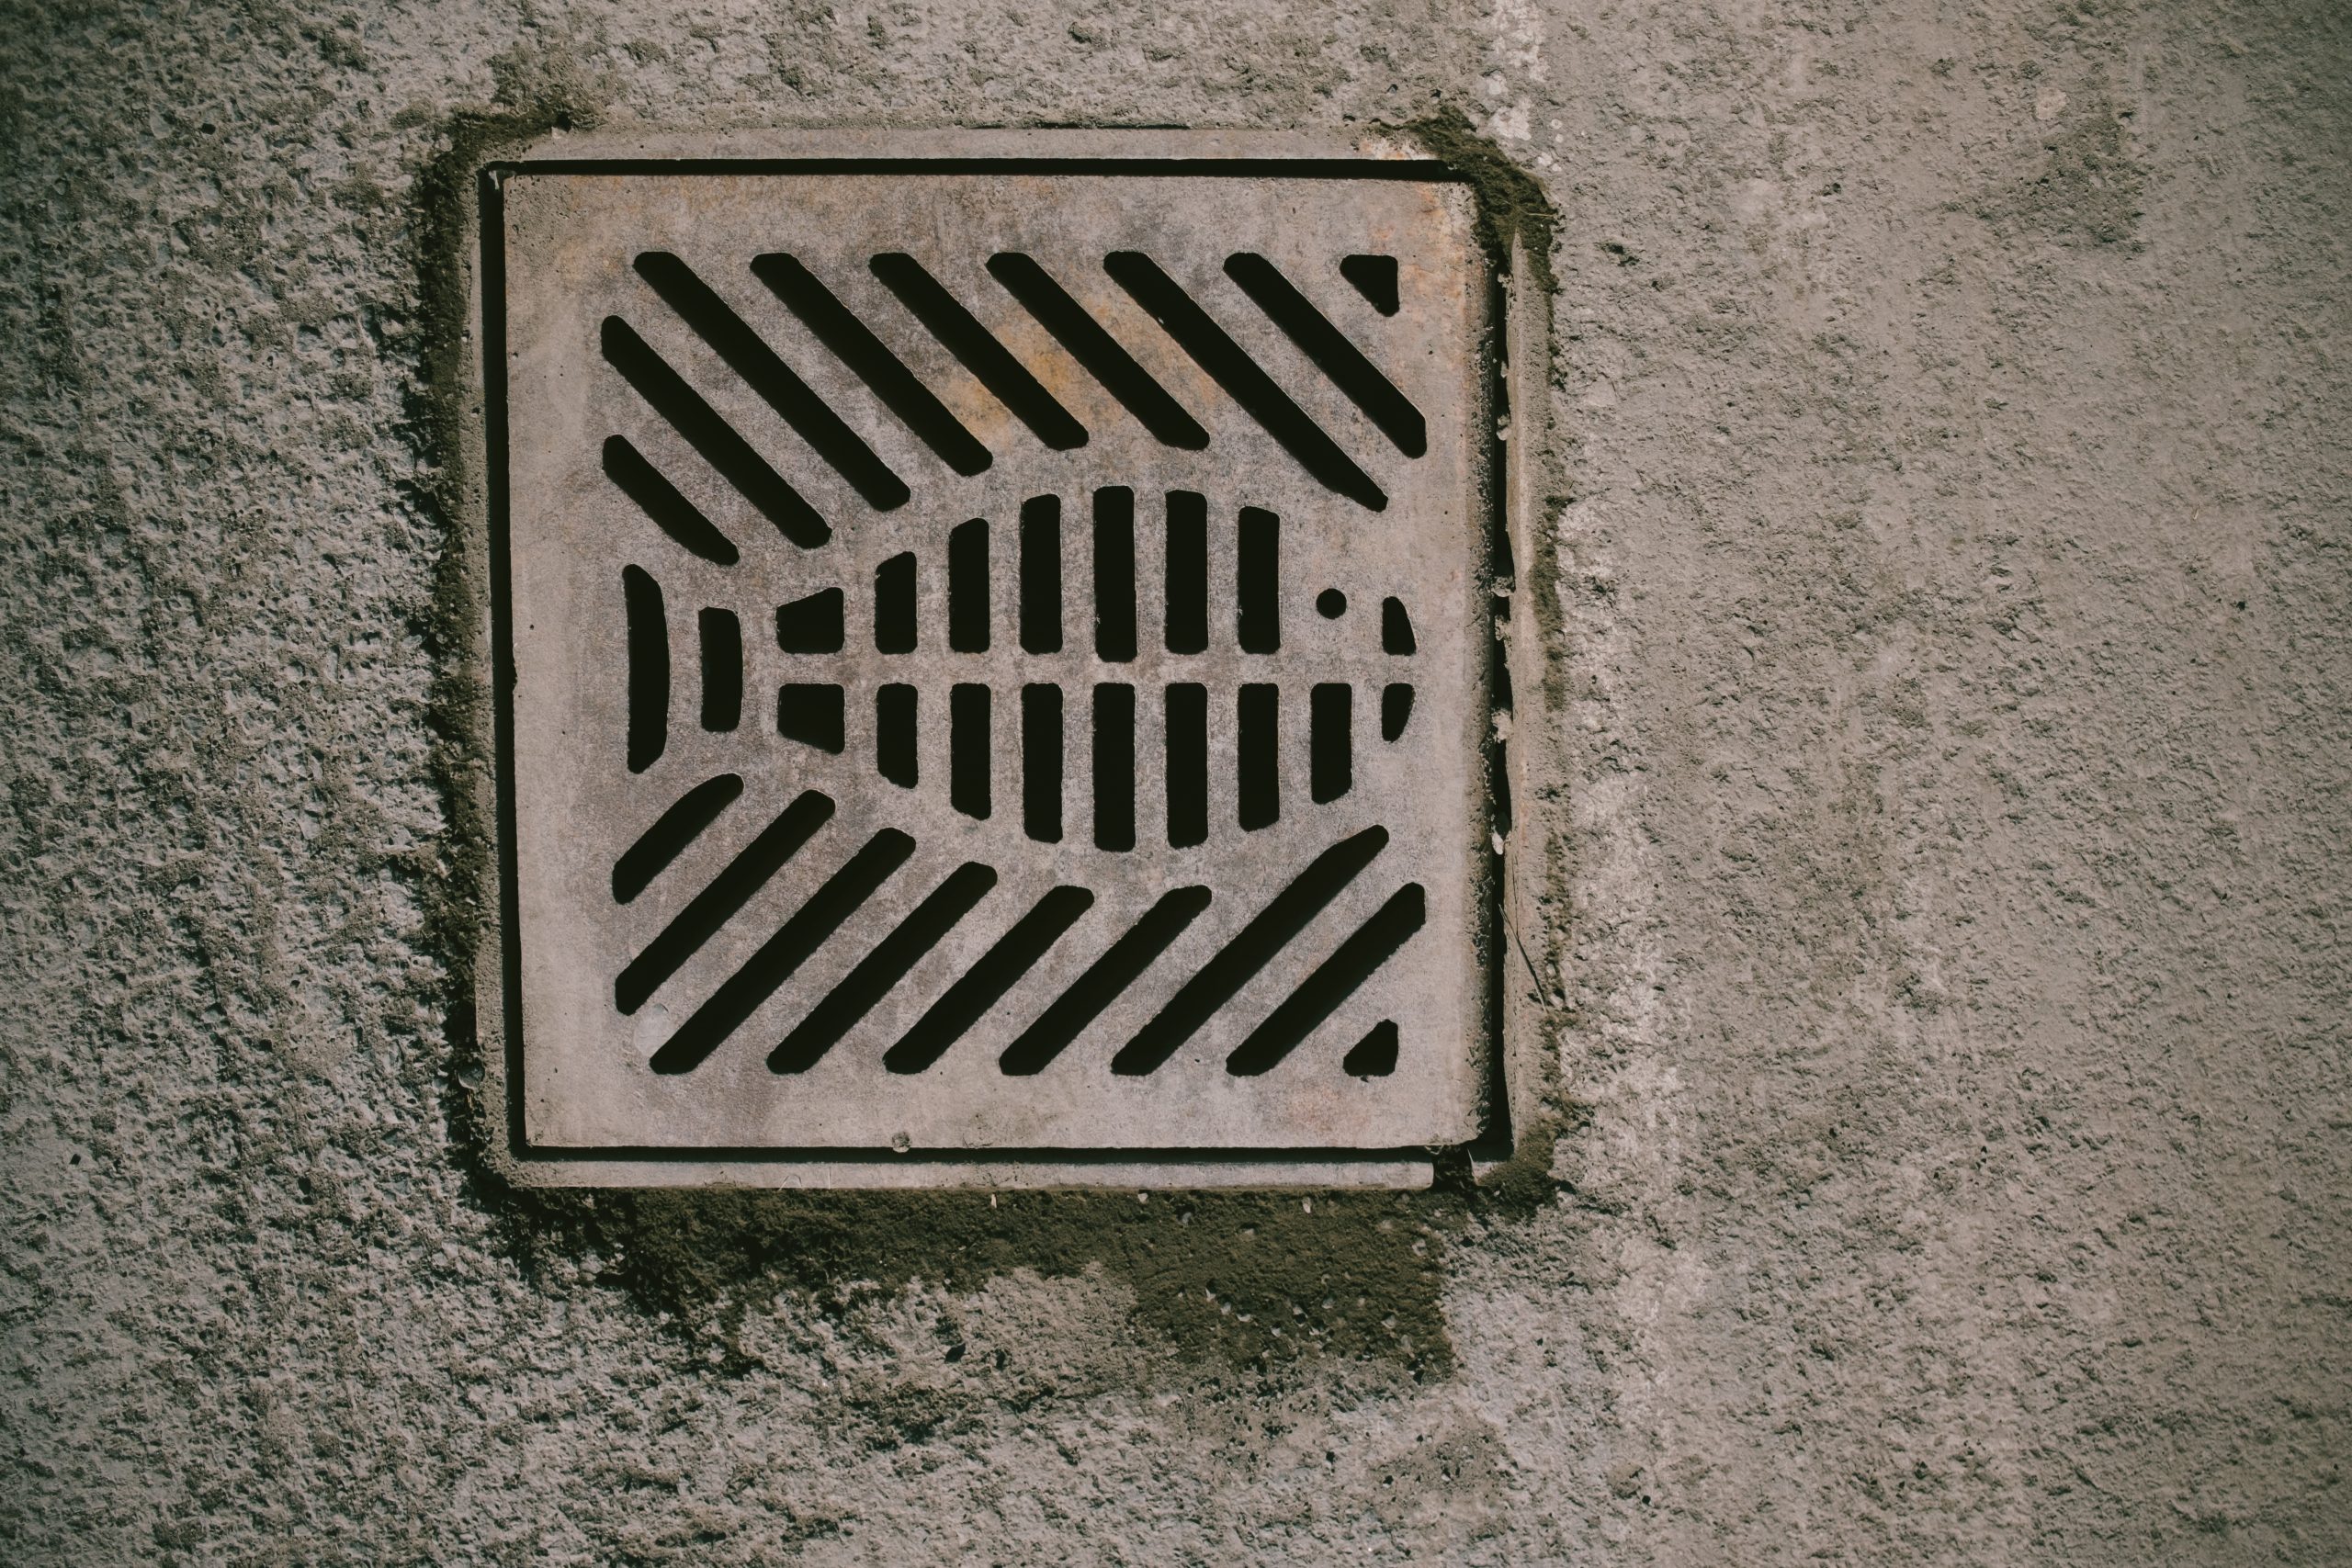 Image of city infrastructure, a sewer drain